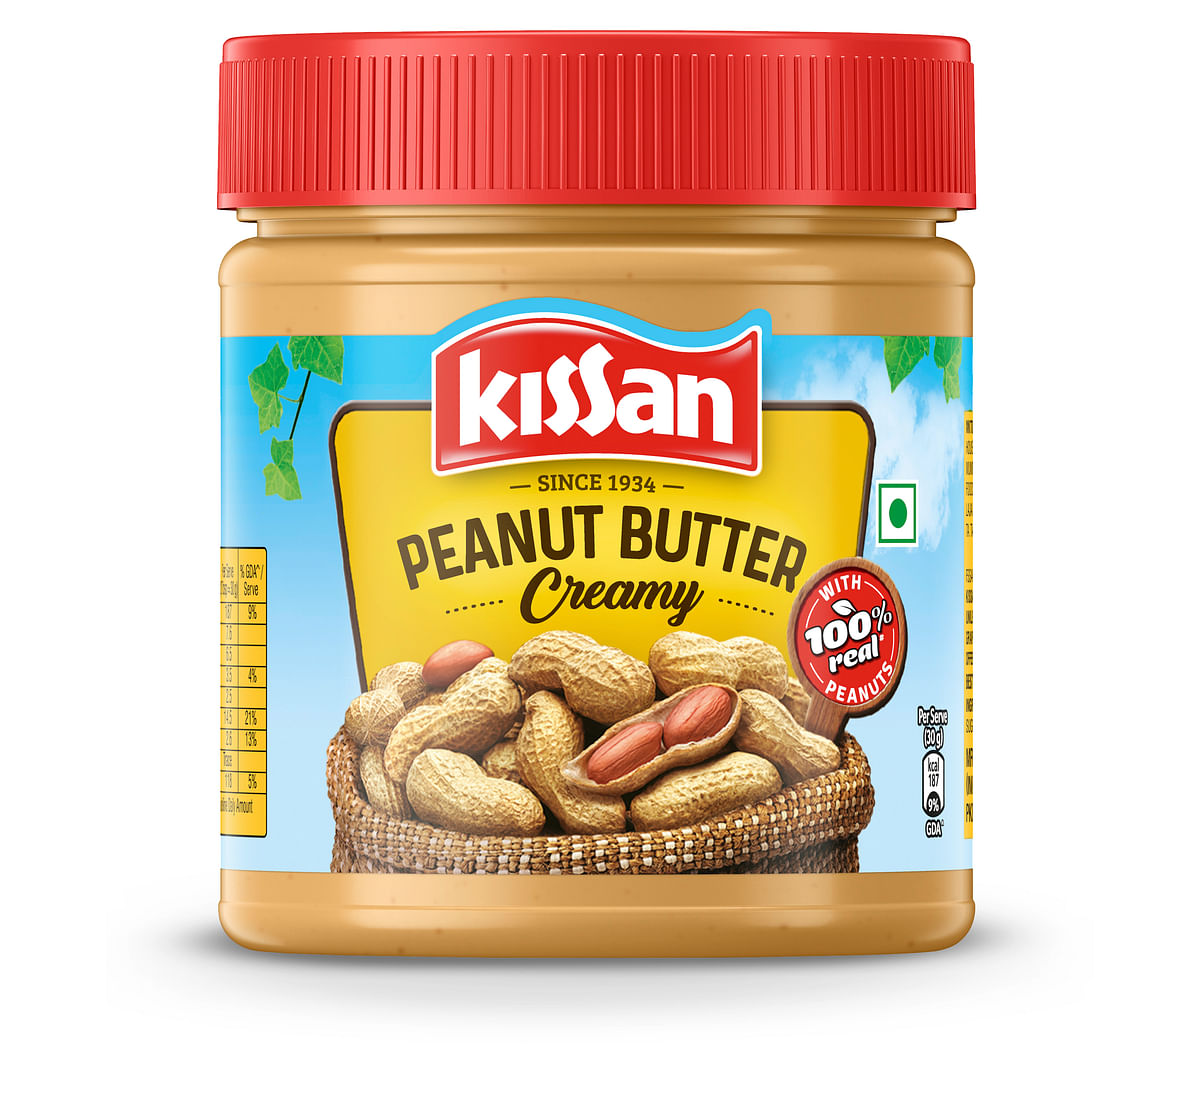 Can Hindustan Unilever’s Kissan get Indians to embrace peanut butter like it did with jam?